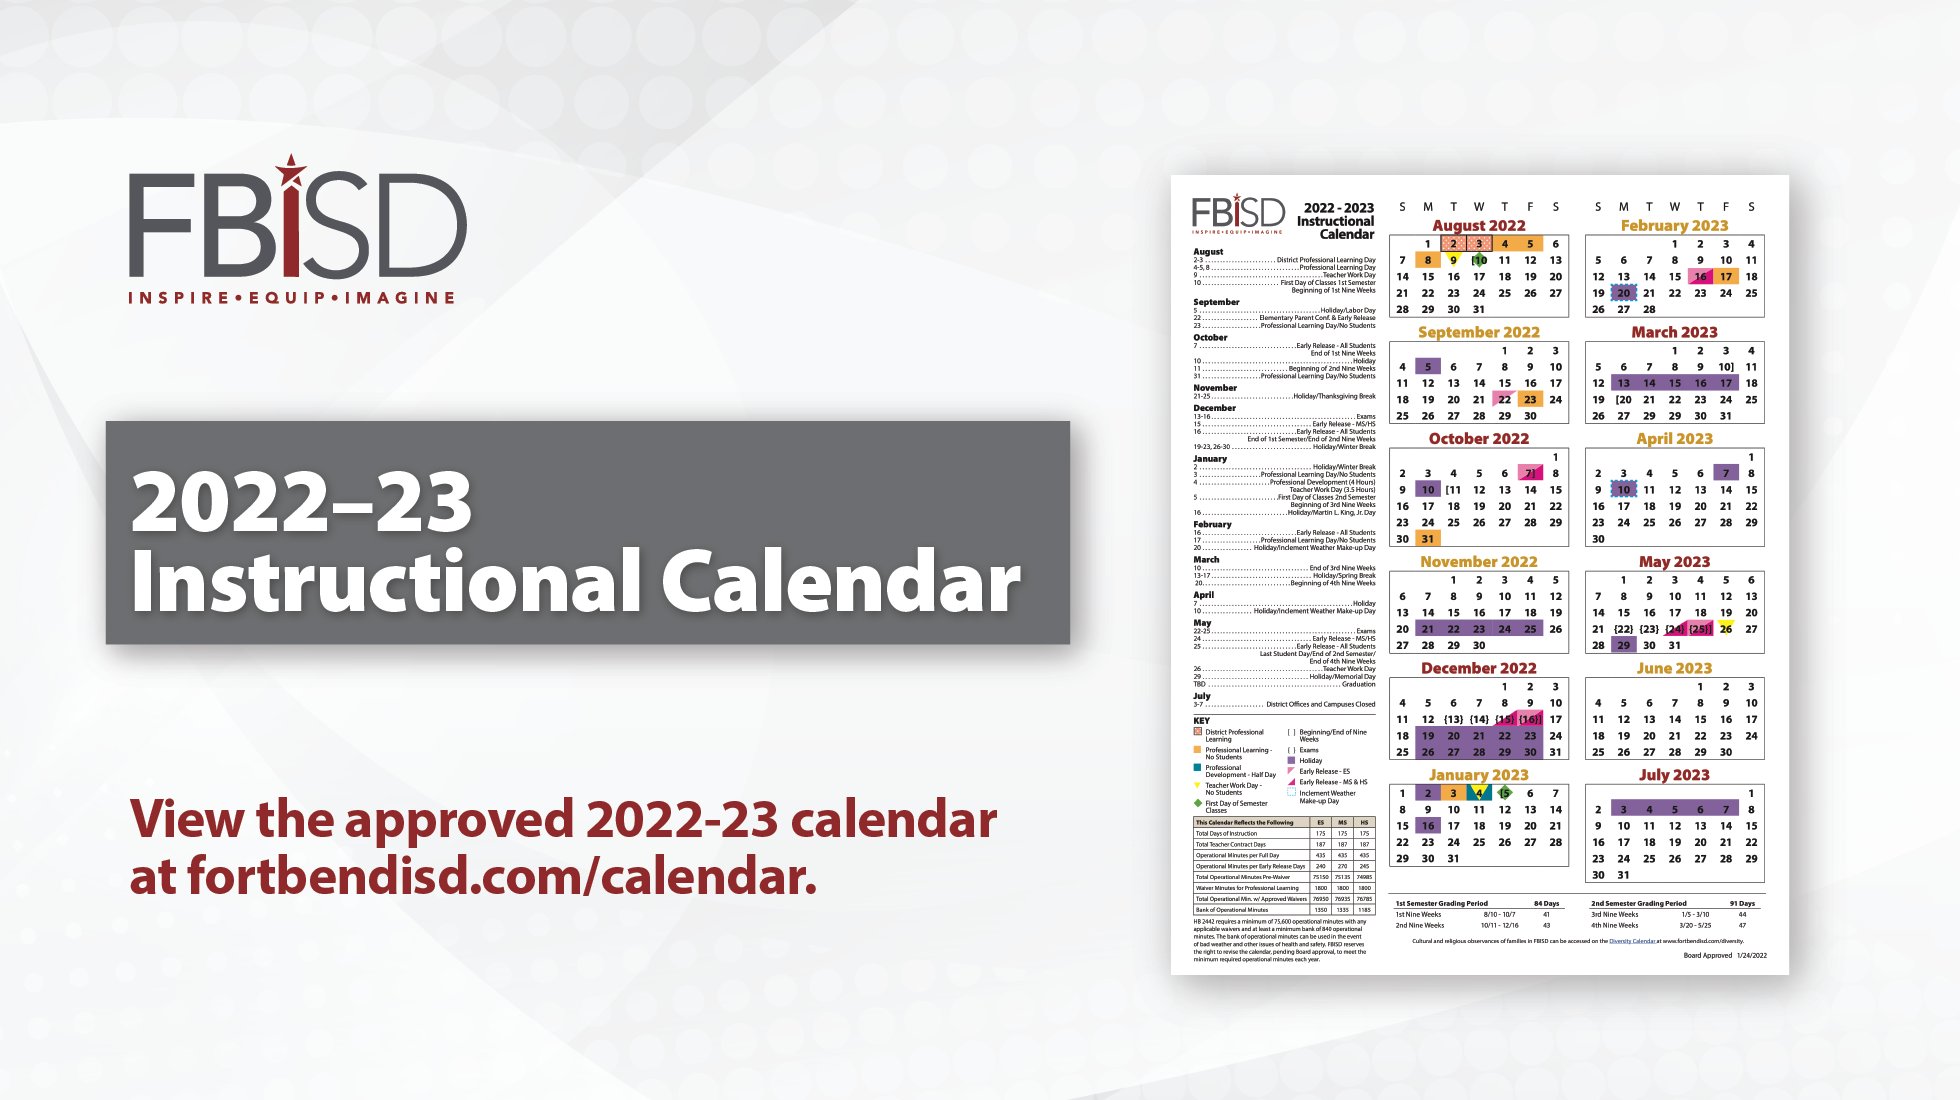 Fbisd 2022 23 Calendar Fort Bend Isd On Twitter: "The 2022-23 Instructional Calendar Has Been  Approved By The Fort Bend Isd Board Of Trustees. 📅 View The Approved 2022-23  Calendar At Https://T.co/Sussnjxanh. Https://T.co/Y4Gaewjwxc" / Twitter